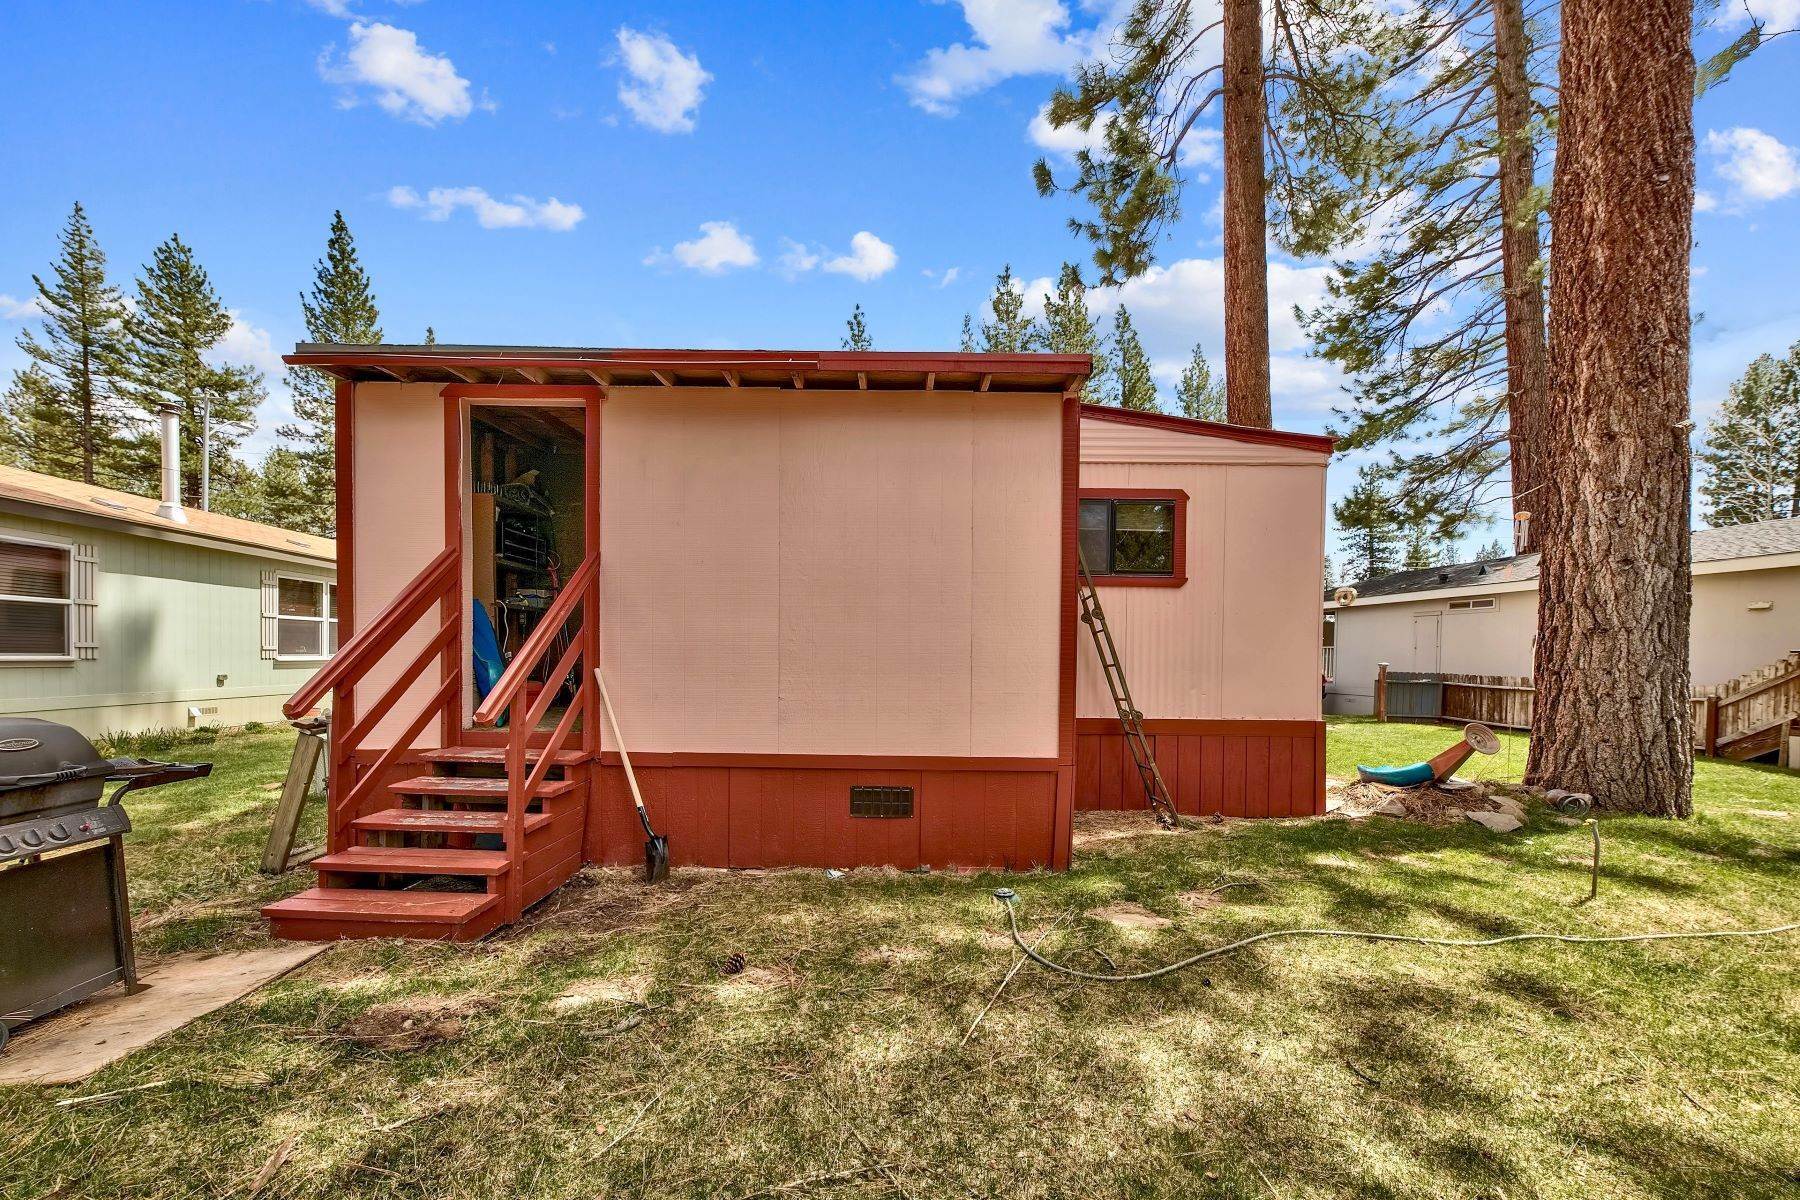 16. Property for Active at Coachland Mobile Home 10100 Pioneer Trail, #5 Truckee, California 96161 United States